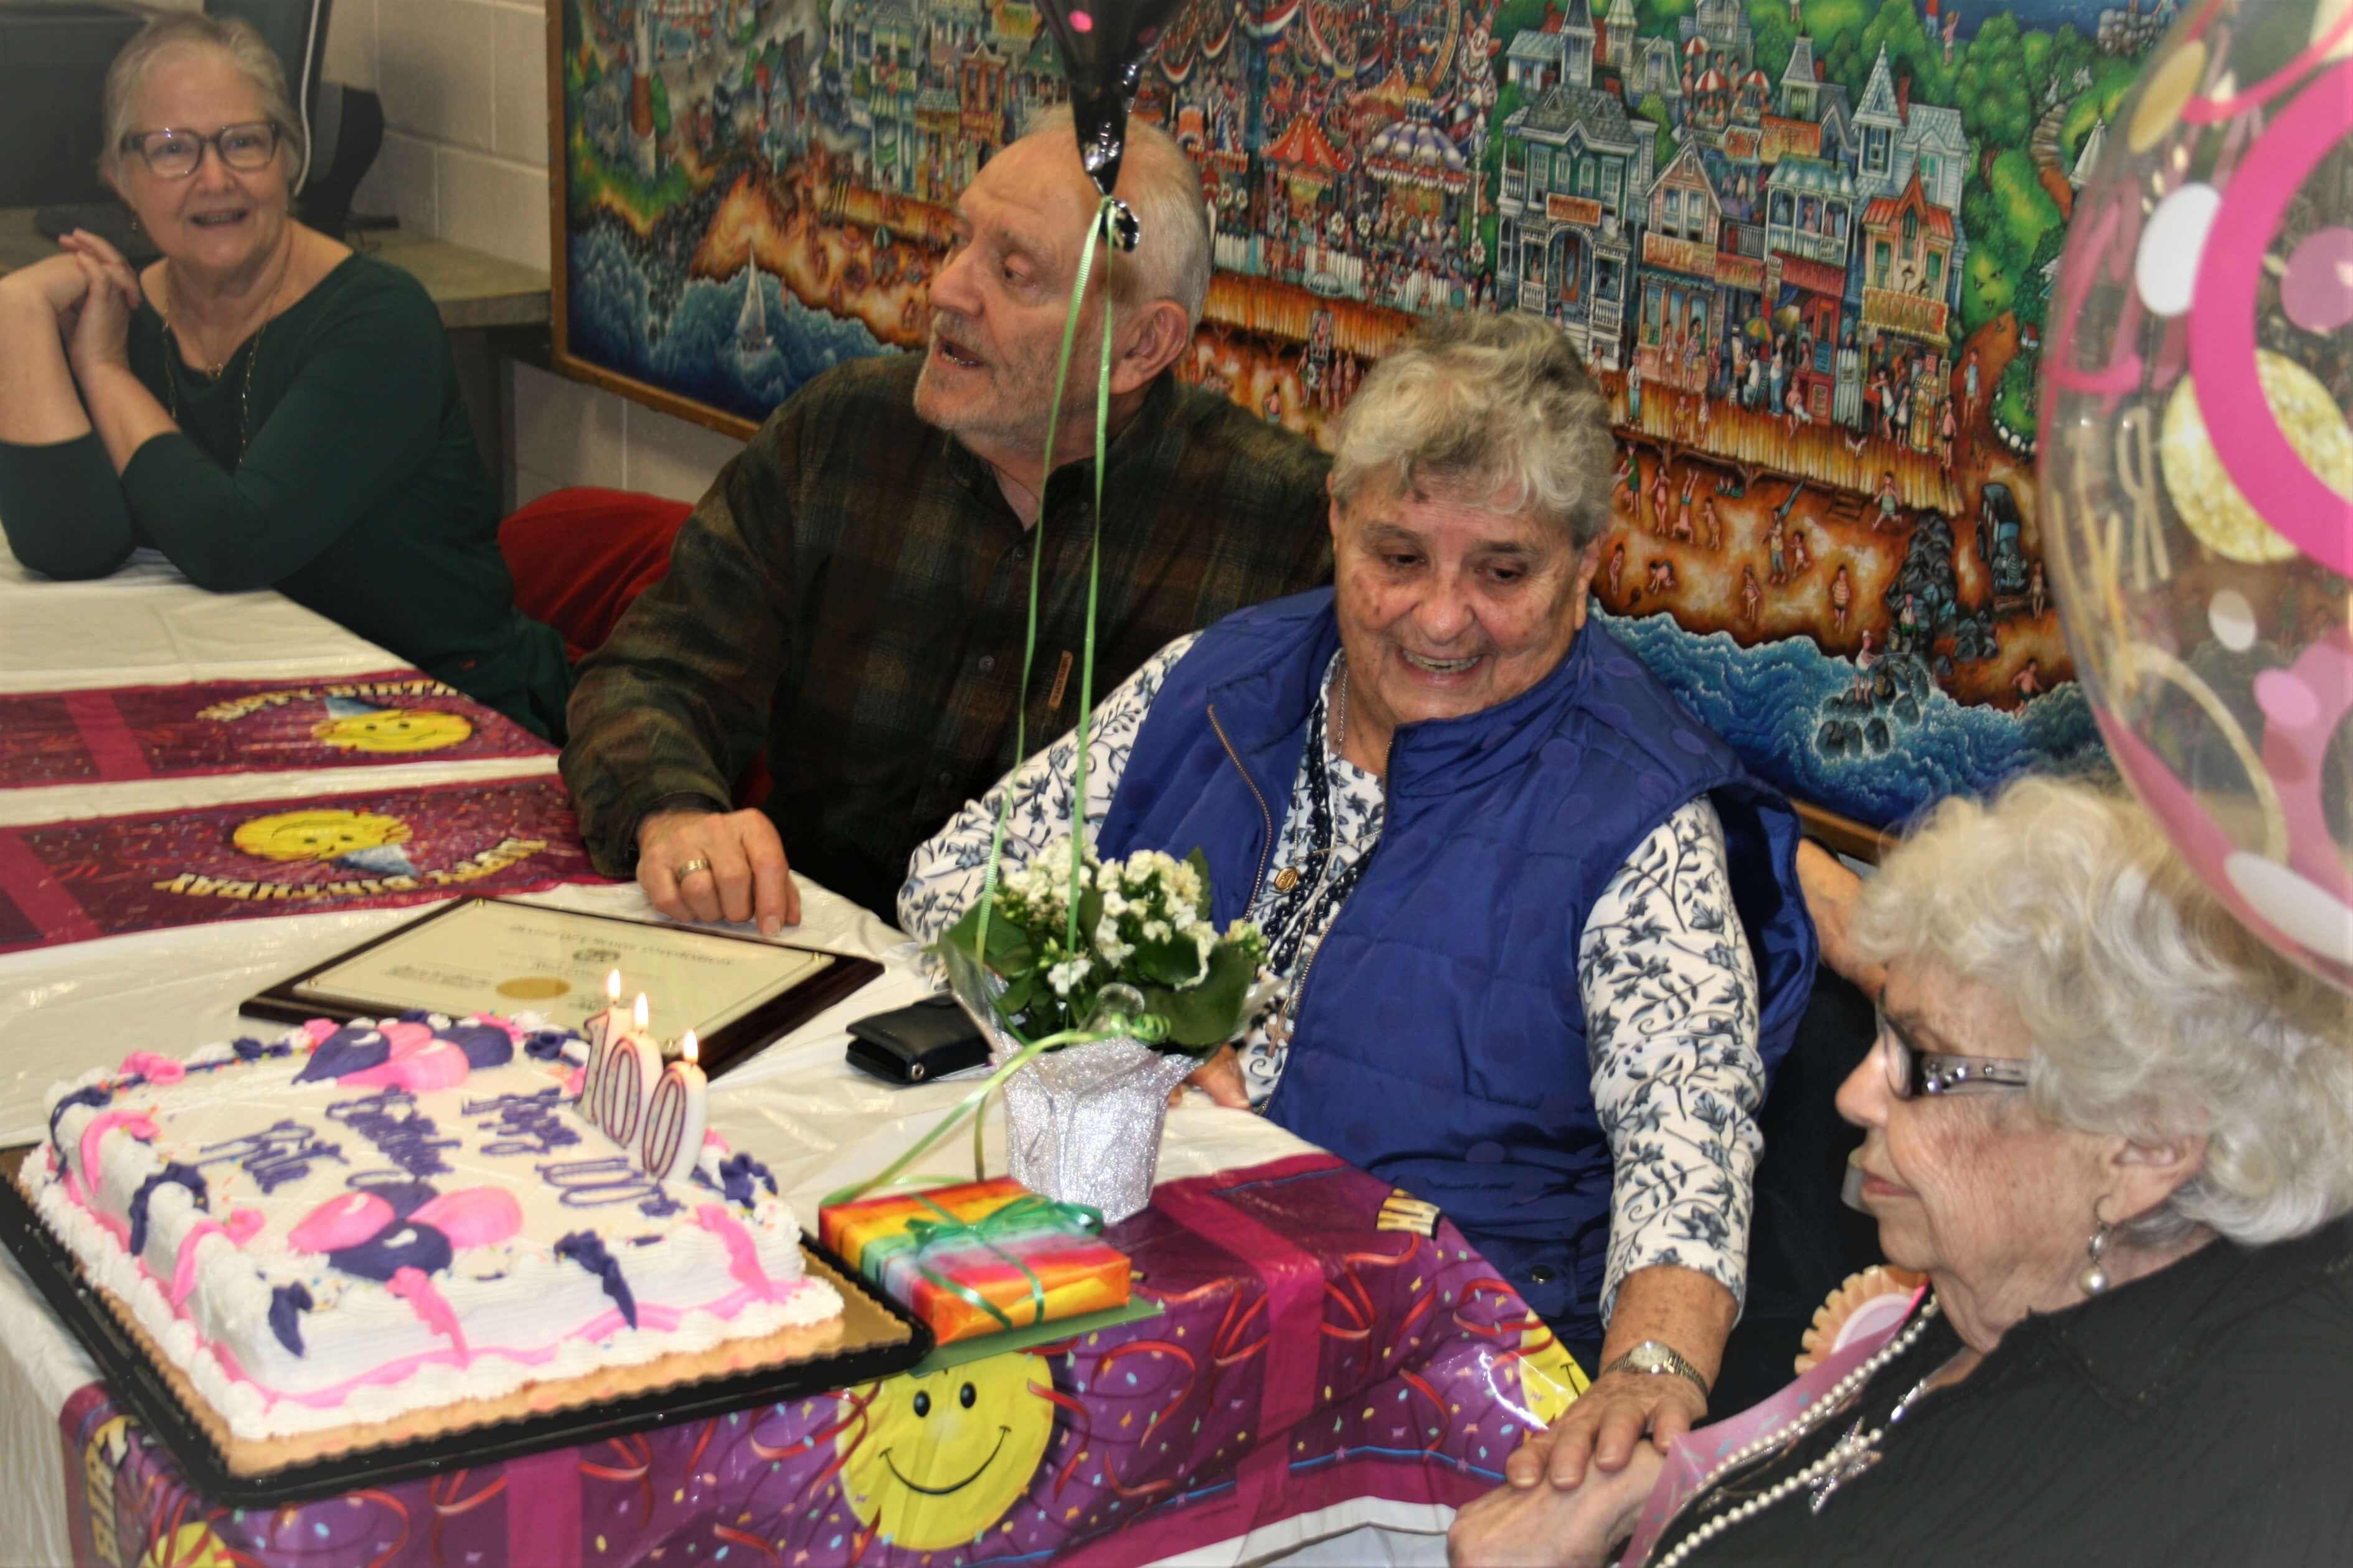 Members of Rita Lomas’ family helped her celebrate her 100th birthday with gifts and a cake.